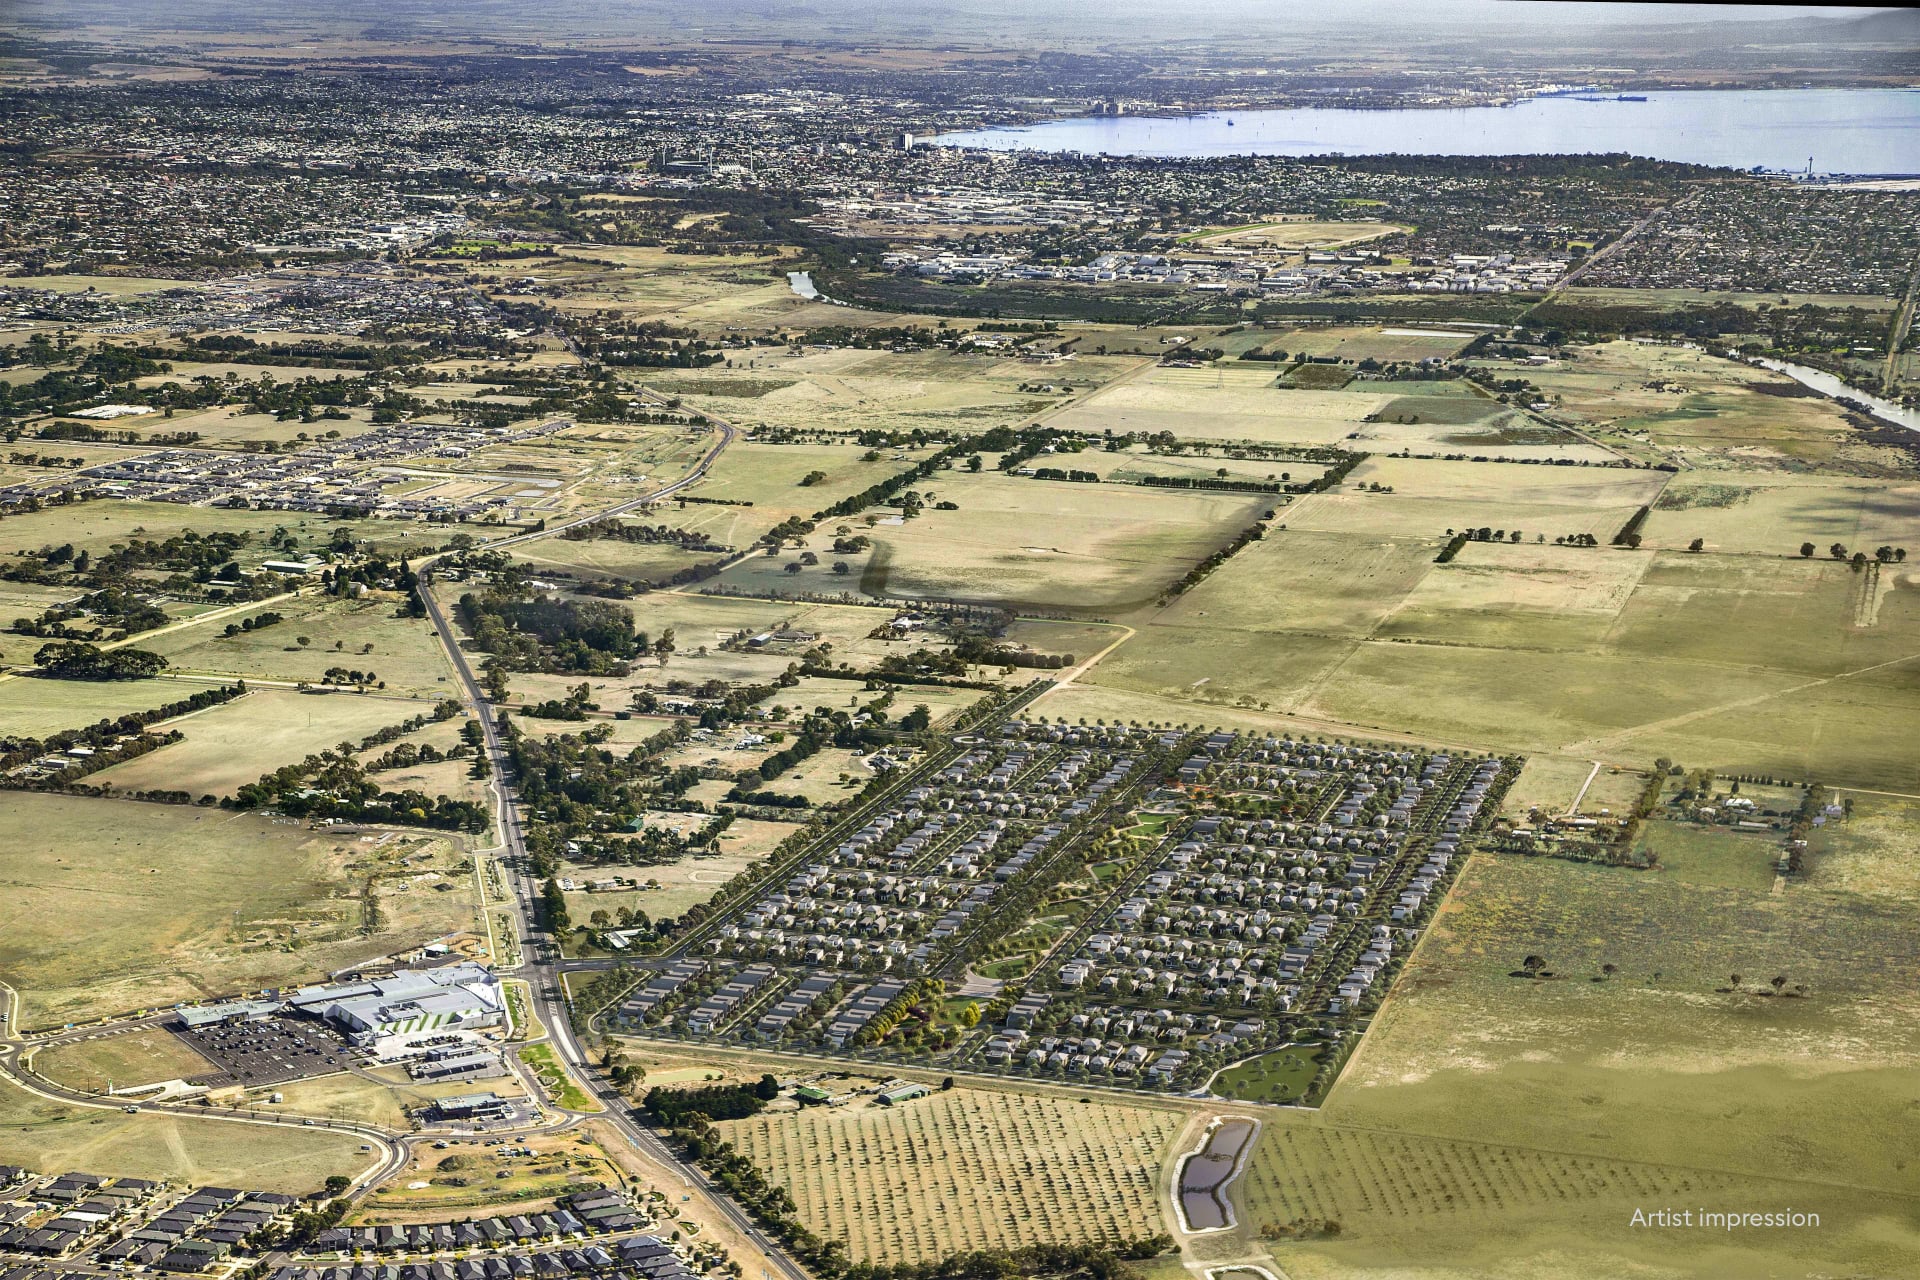 New housing development aims to cater to significant population growth anticipated for Geelong